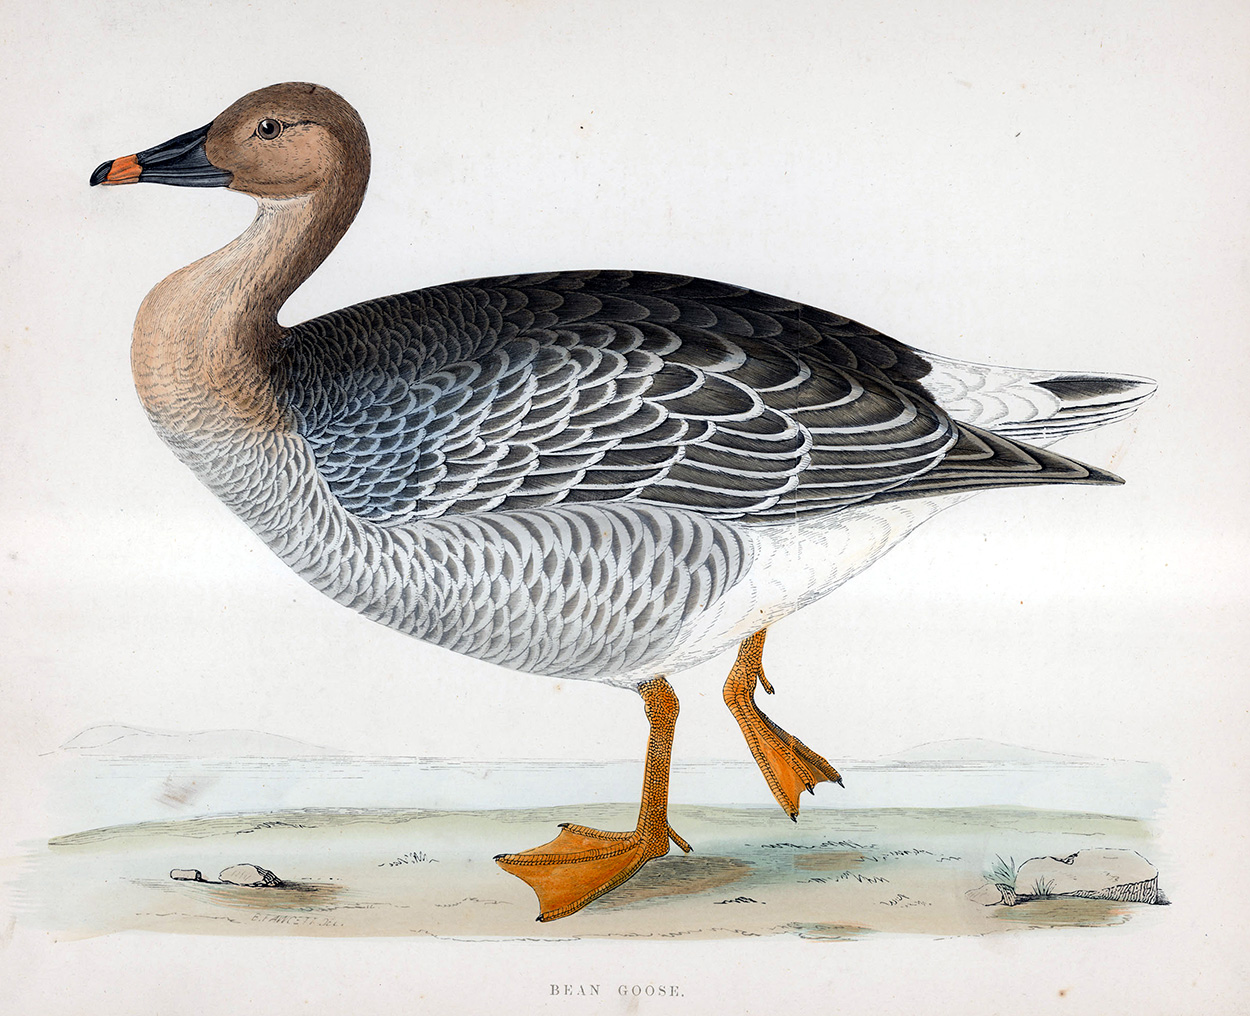 Bean Goose - hand coloured lithograph 1891 (Print) art by Beverley R Morris Art at The Illustration Art Gallery